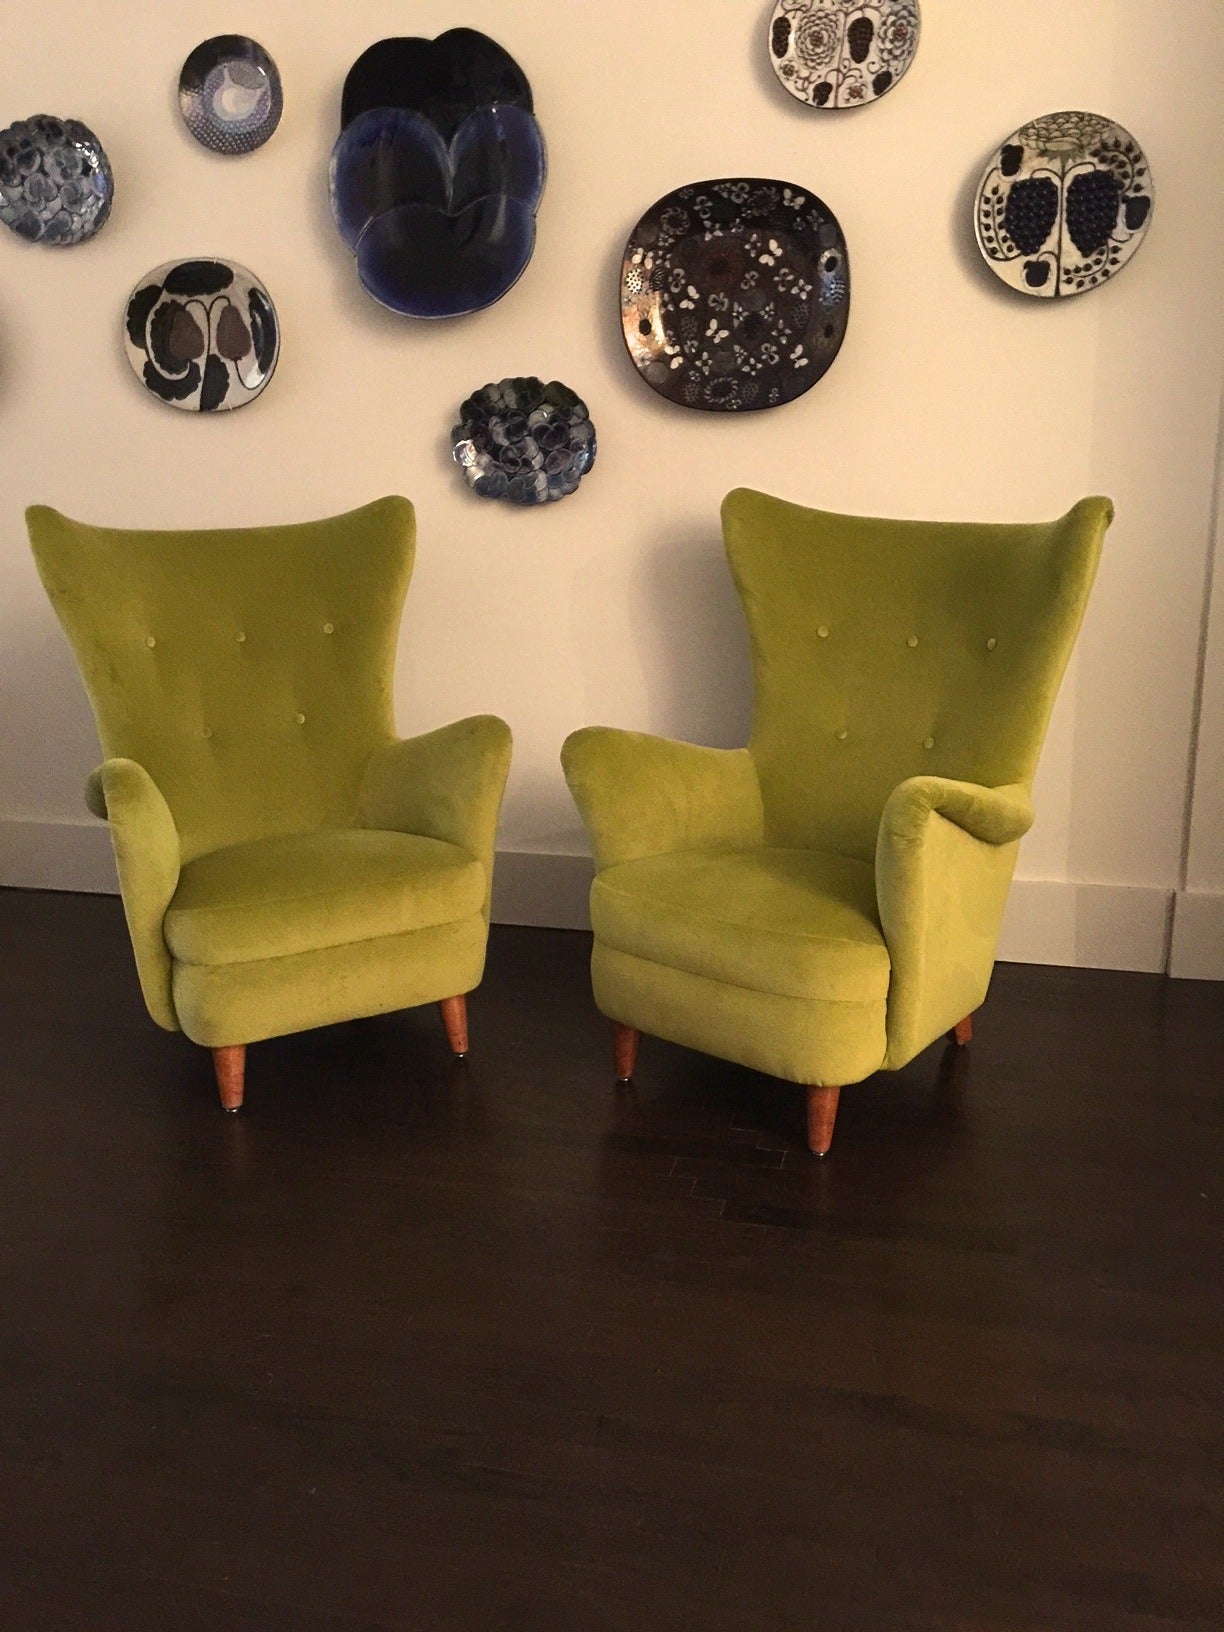 Pair of sculptural lounge chairs.
In the style of Frits Henningsen.
Cabinetmaker, Denmark, circa 1940.
Reupholstered, very comfortable.

Measures: 40.75 H x 30.5